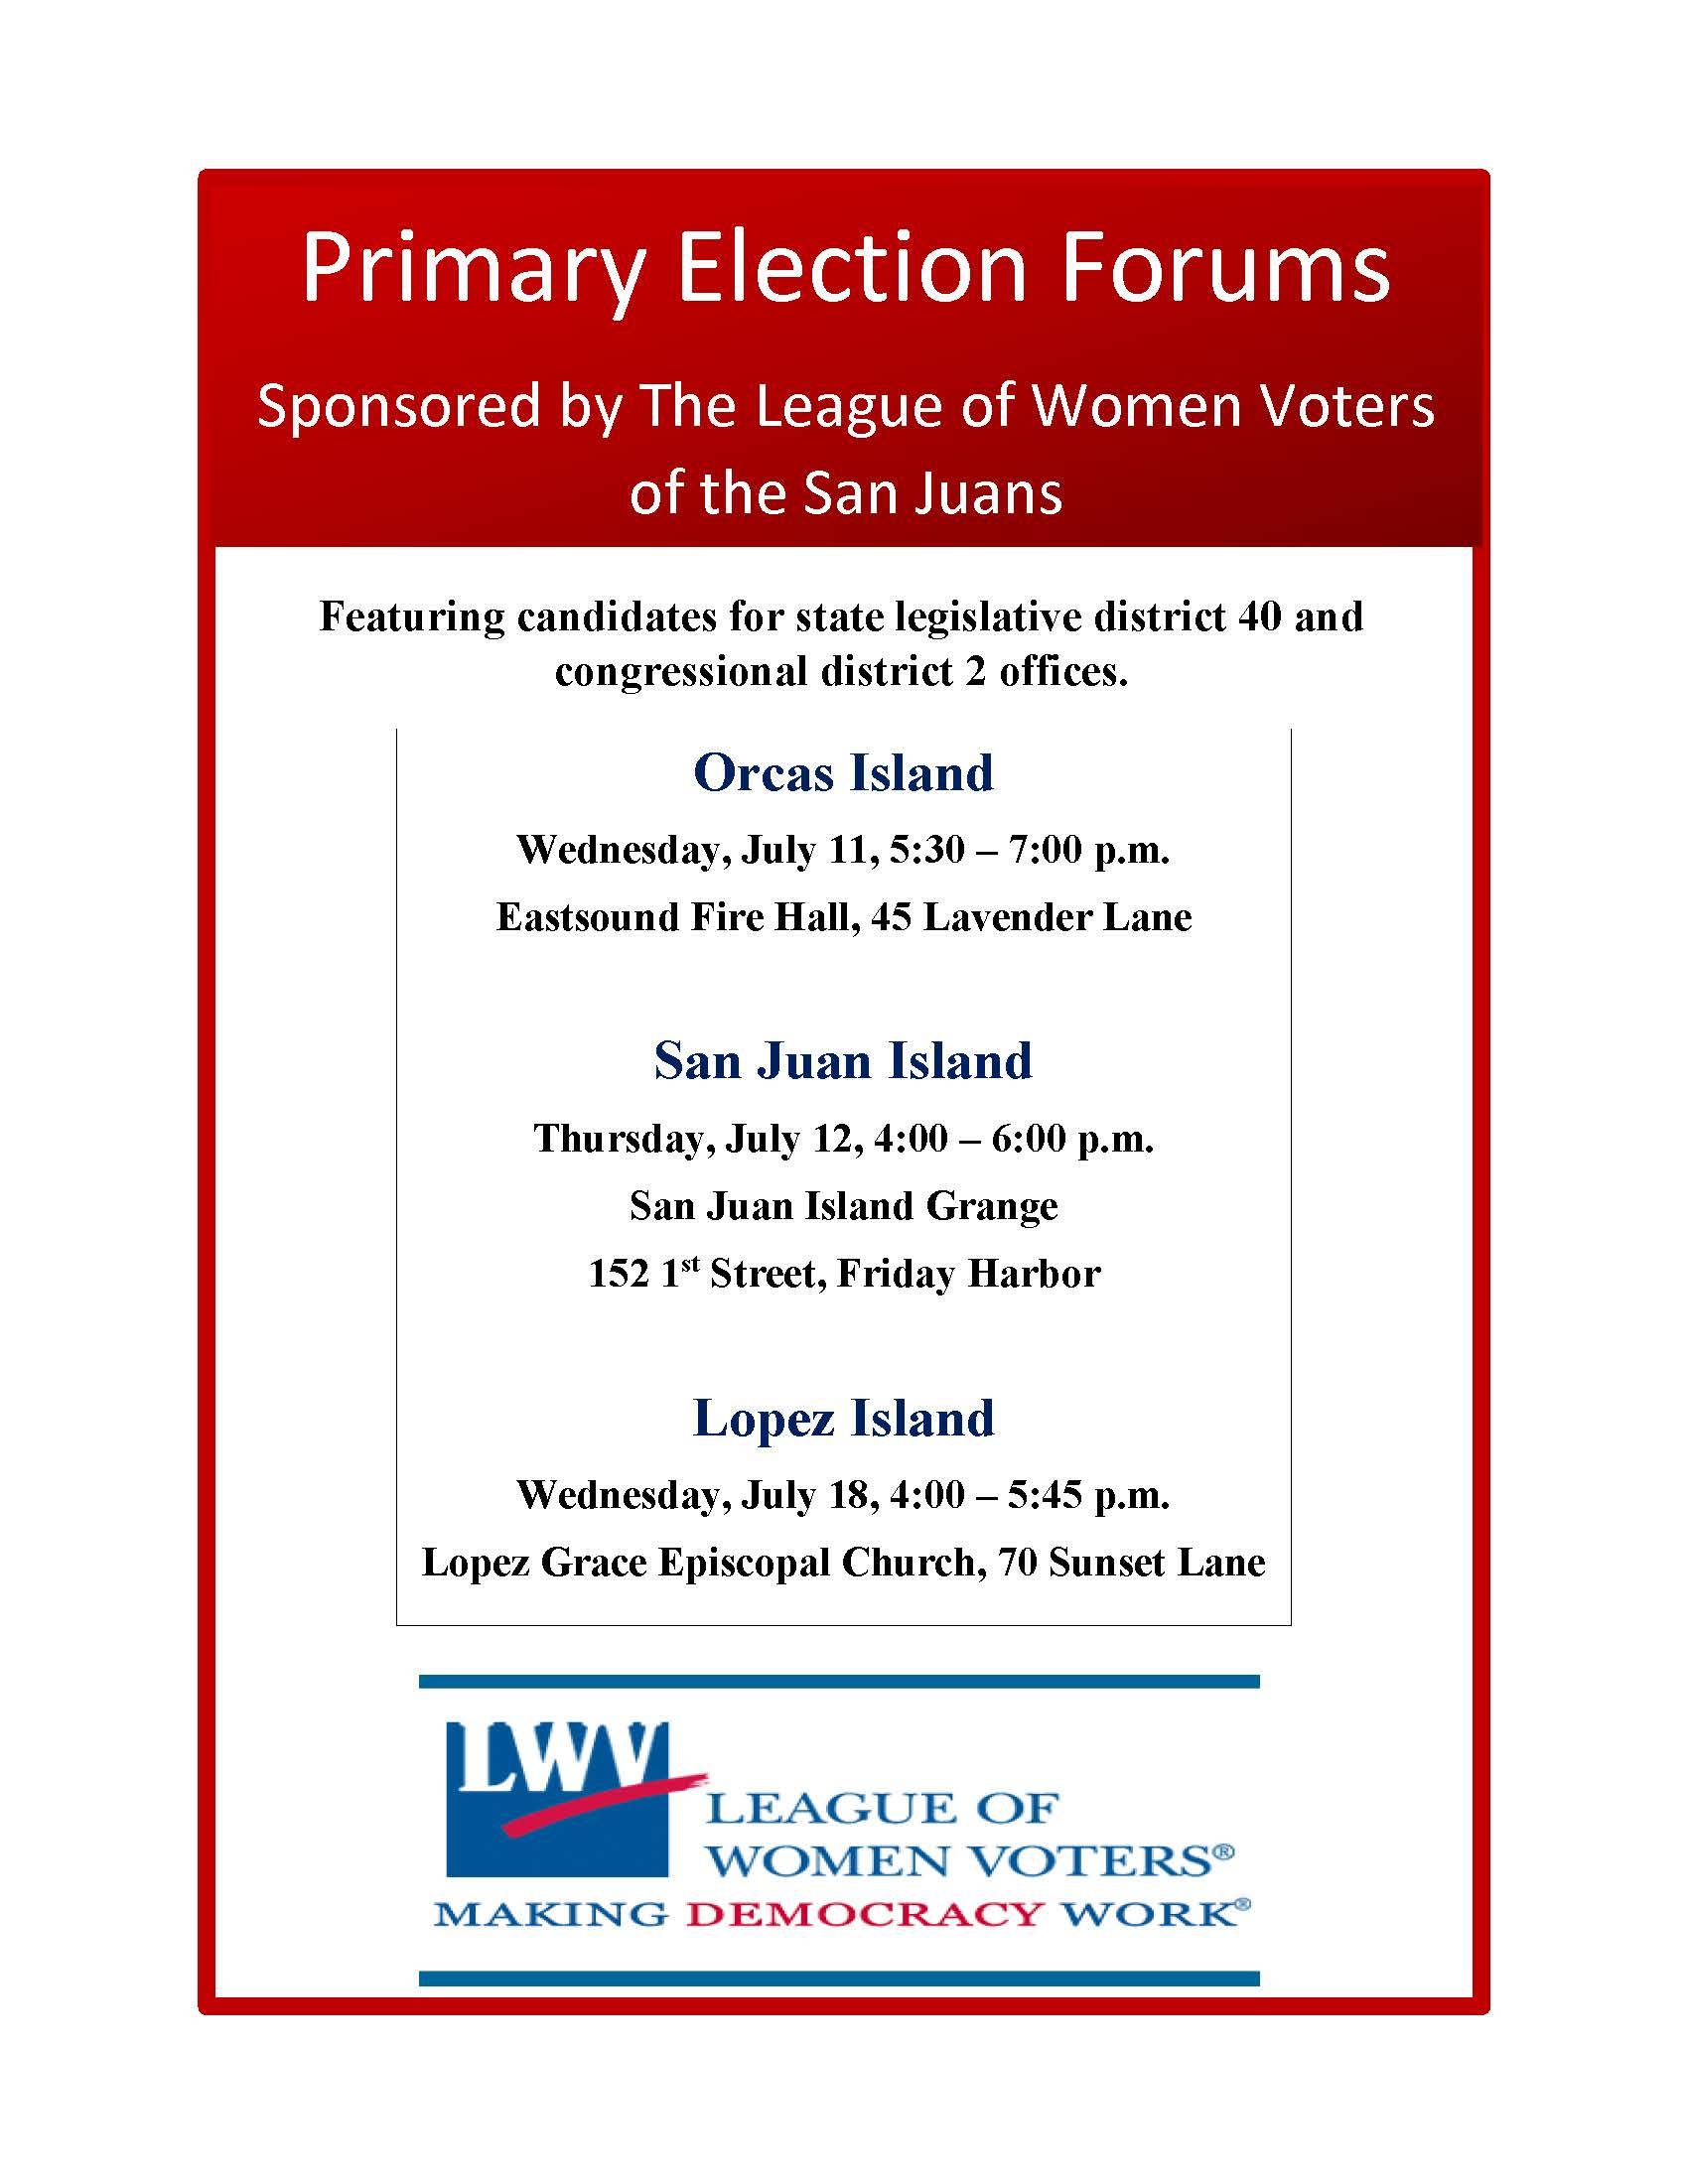 League of Women Voters to hold forums for state, national primary candidates